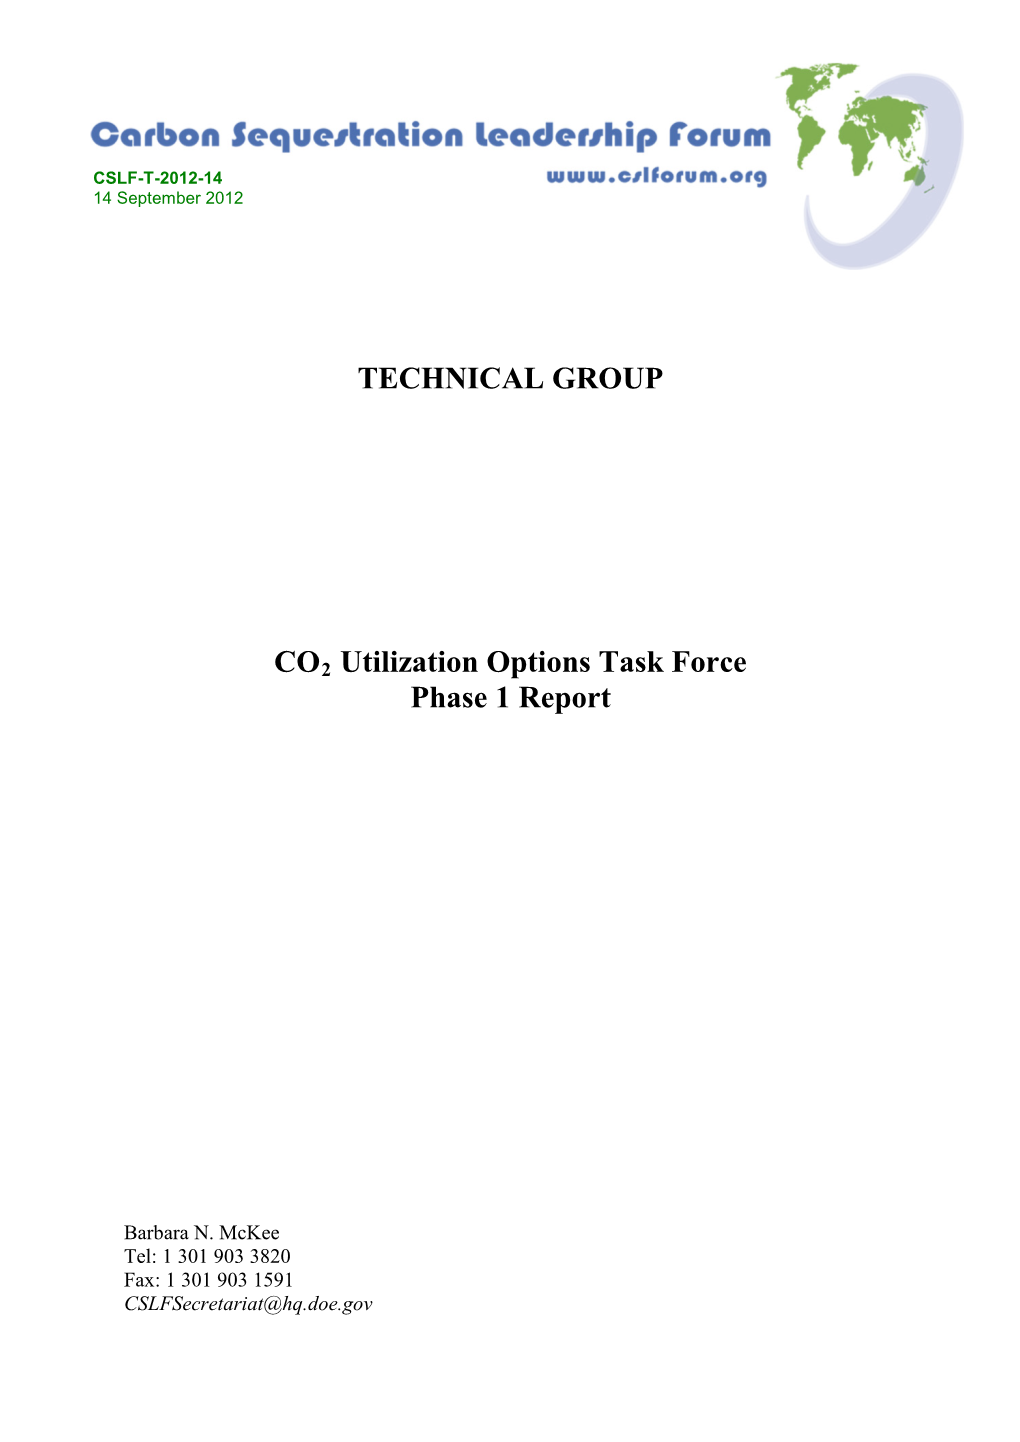 TECHNICAL GROUP CO2 Utilization Options Task Force Phase 1 Report